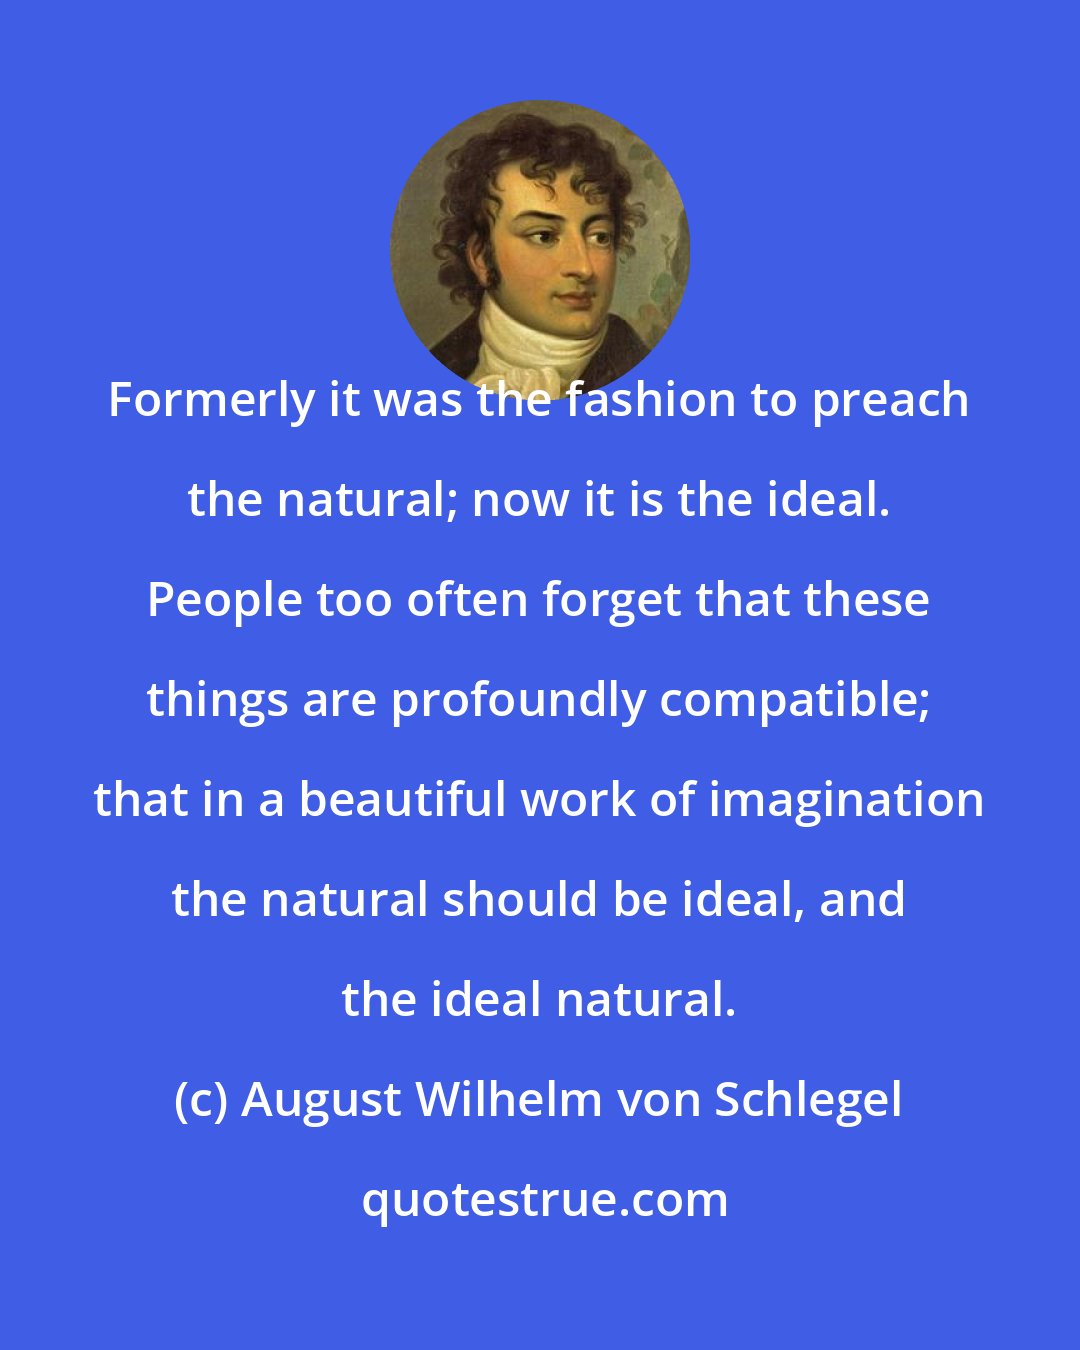 August Wilhelm von Schlegel: Formerly it was the fashion to preach the natural; now it is the ideal. People too often forget that these things are profoundly compatible; that in a beautiful work of imagination the natural should be ideal, and the ideal natural.